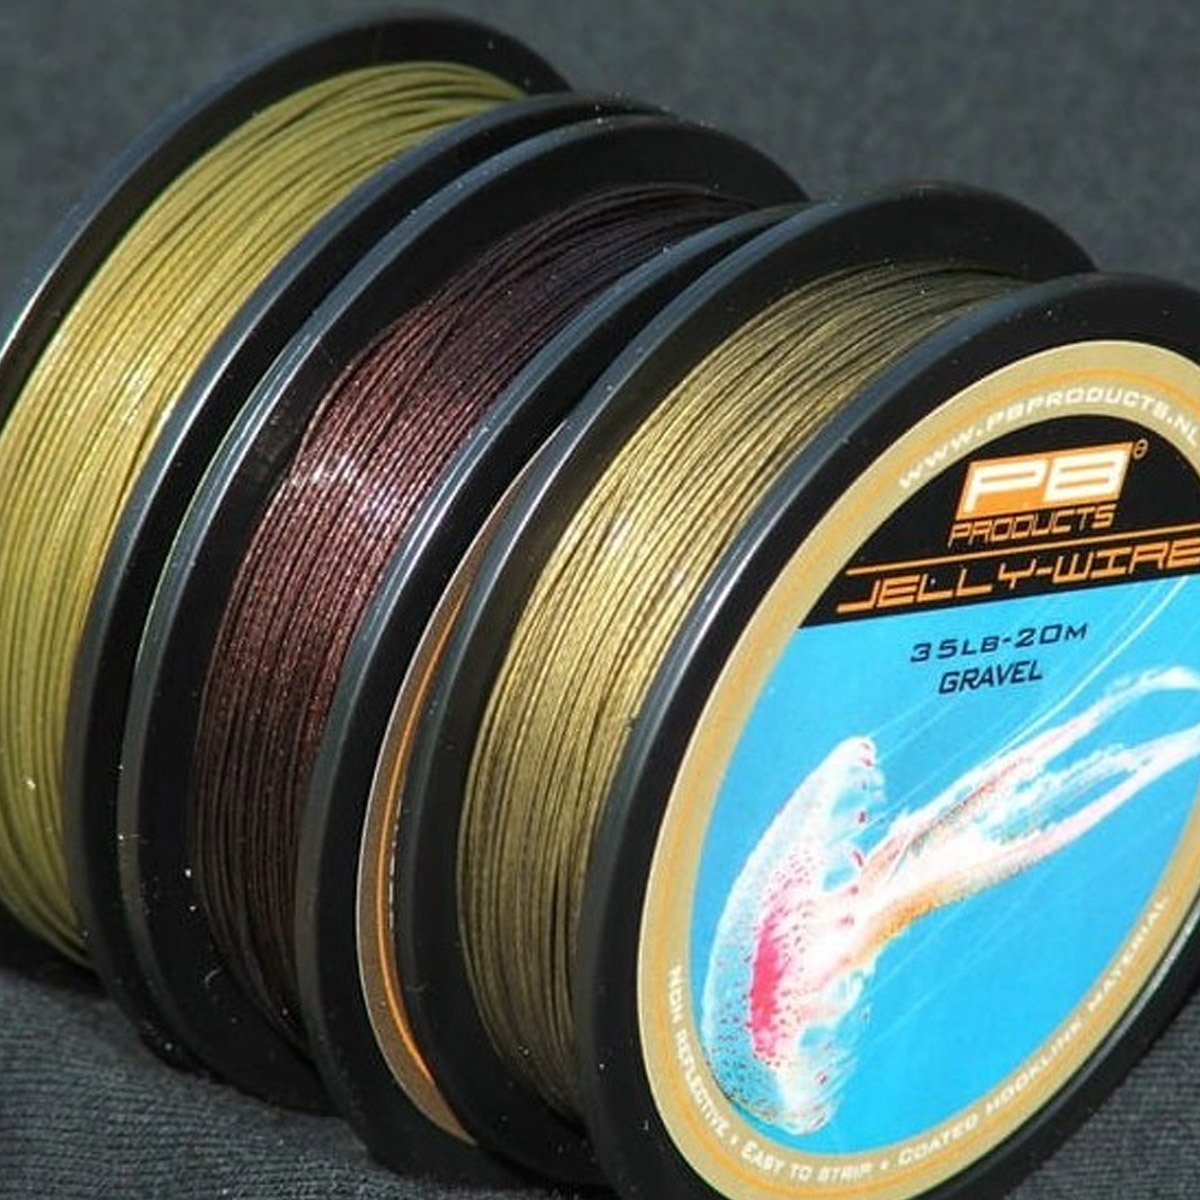 PB Products Jelly Wire Silt